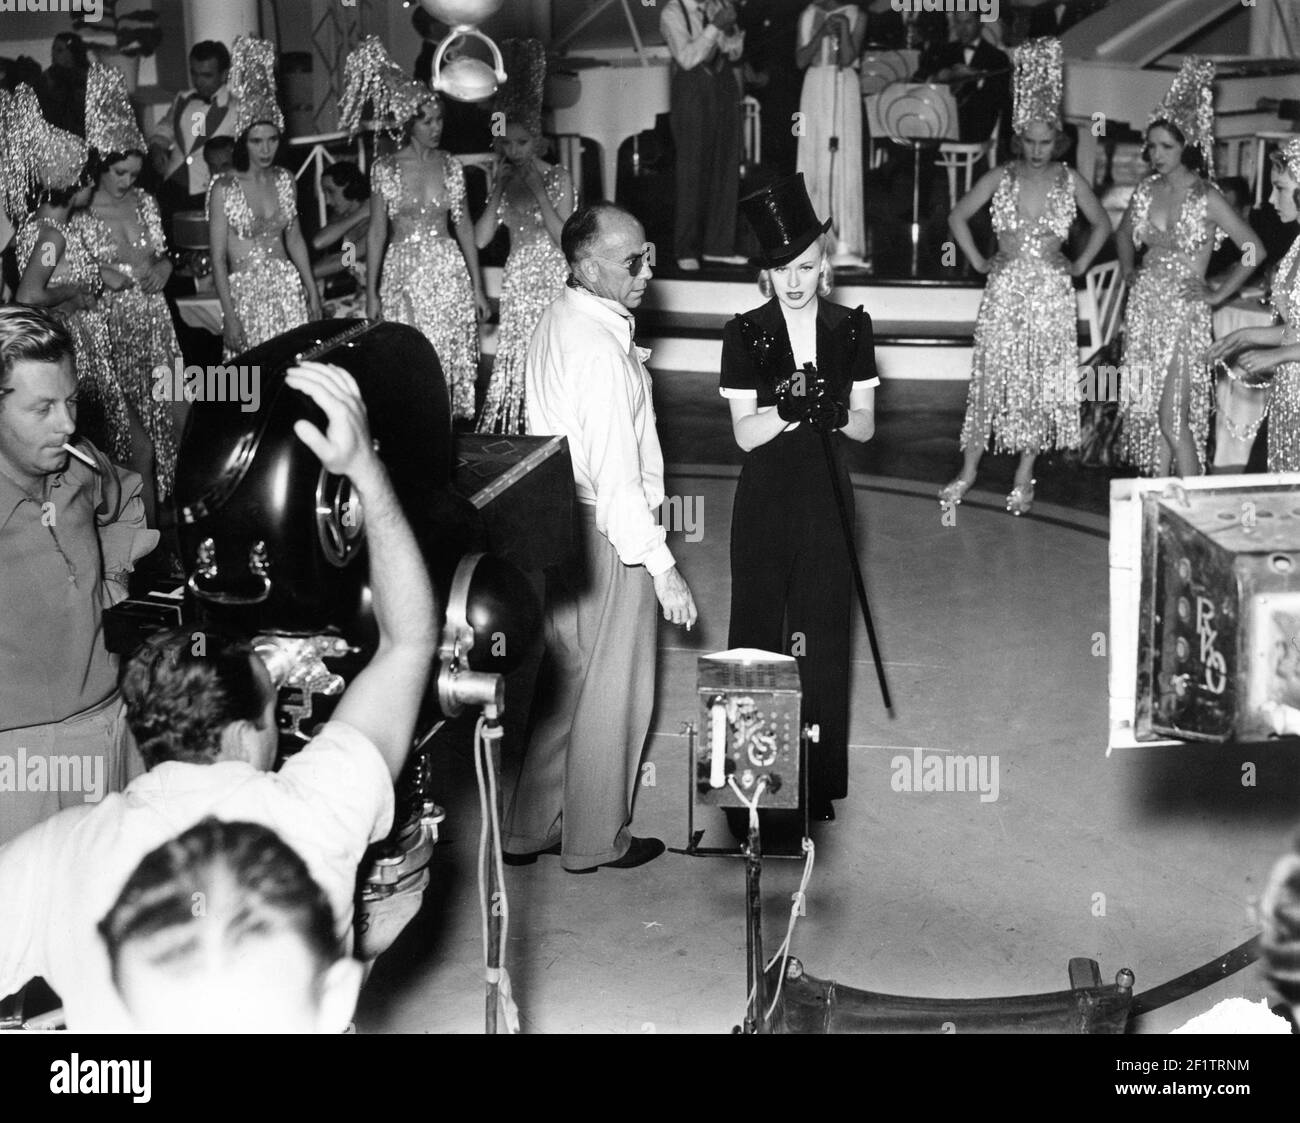 Director GREGORY LA CAVA and GINGER ROGERS on set candid filming musical number with dancers and camera crew during production of STAGE DOOR 1937 director GREGORY LA CAVA from the play by Edna Ferber and George S. Kaufman RKO Radio Pictures Stock Photo